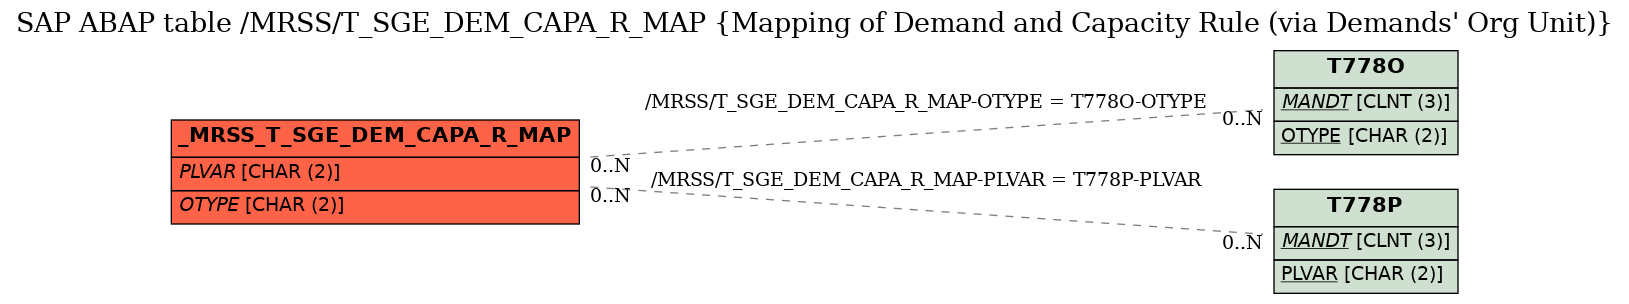 E-R Diagram for table /MRSS/T_SGE_DEM_CAPA_R_MAP (Mapping of Demand and Capacity Rule (via Demands' Org Unit))